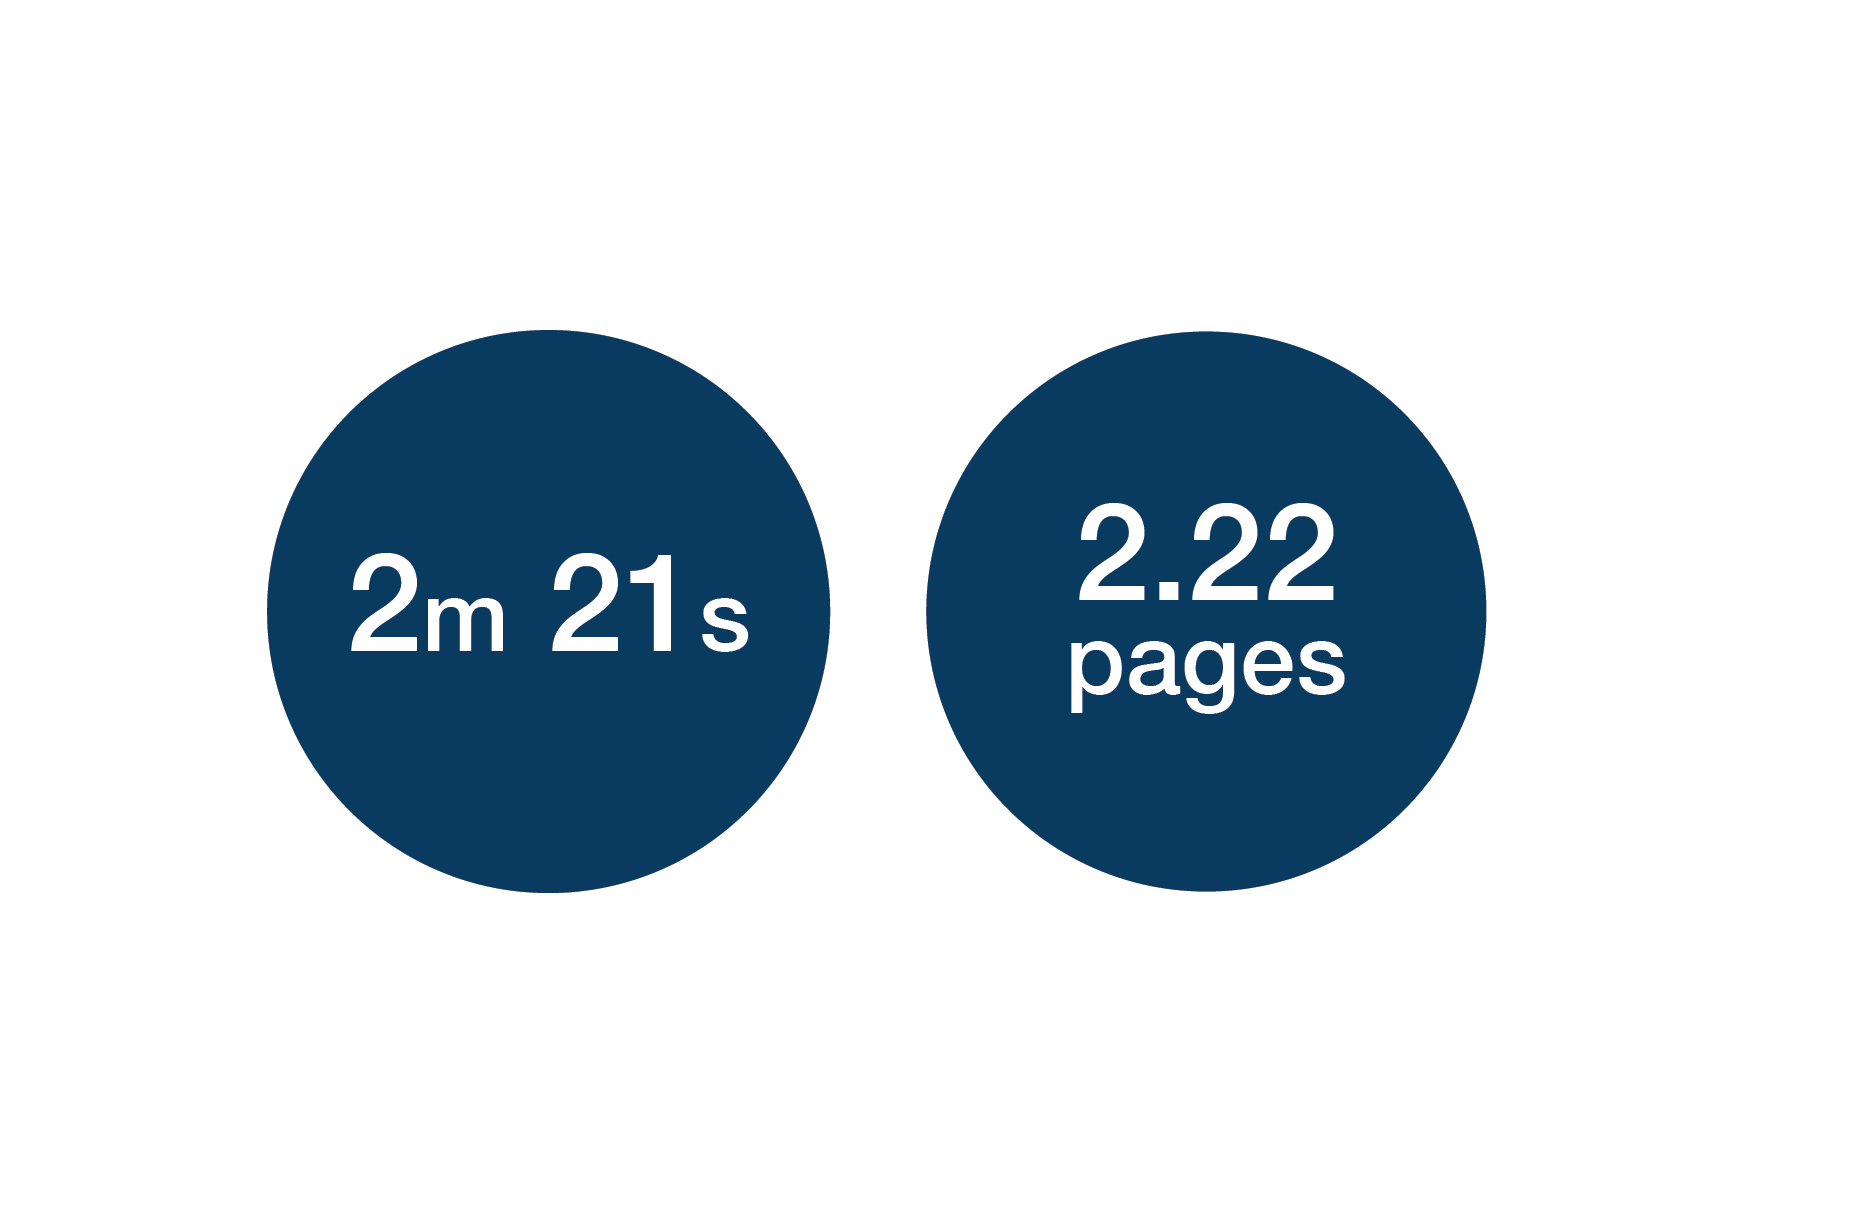 An infographic depicting 2 minutes and 21 seconds for session times and 2.22 pages for number of pages used on the website. 